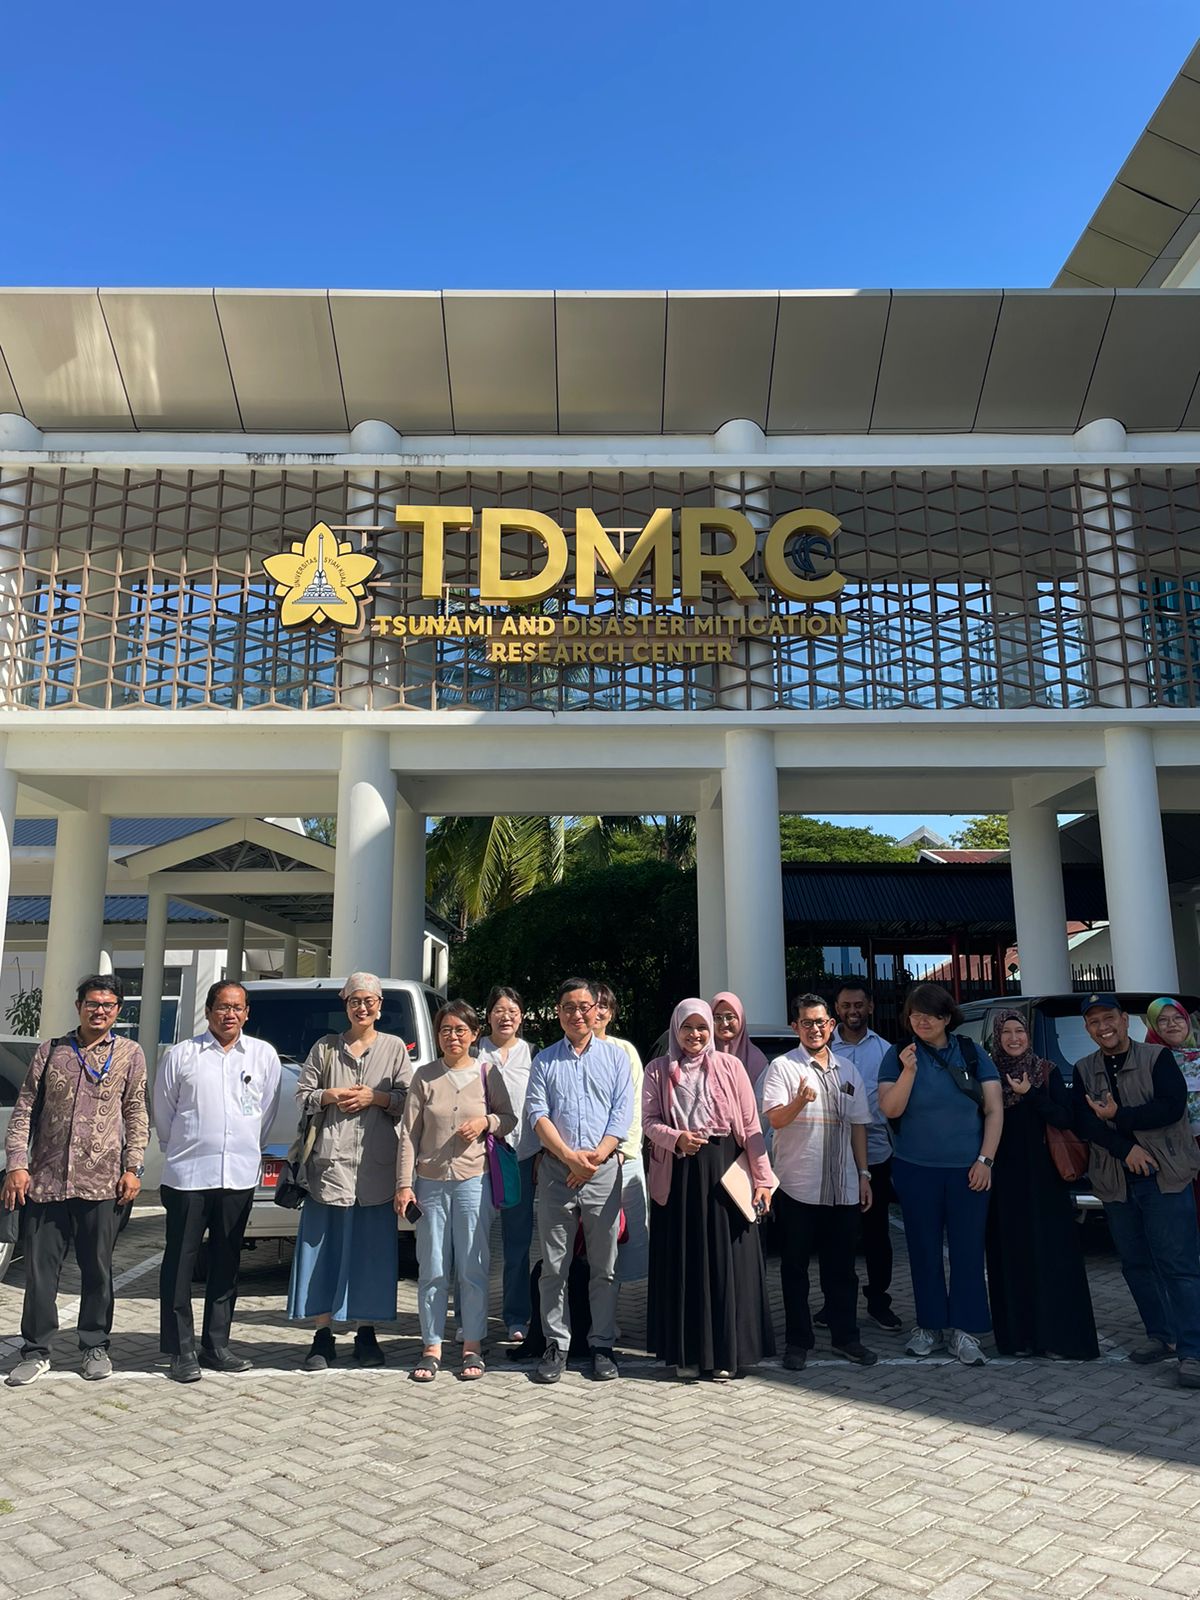 TDMRC received a visit from Otago University, New Zealand